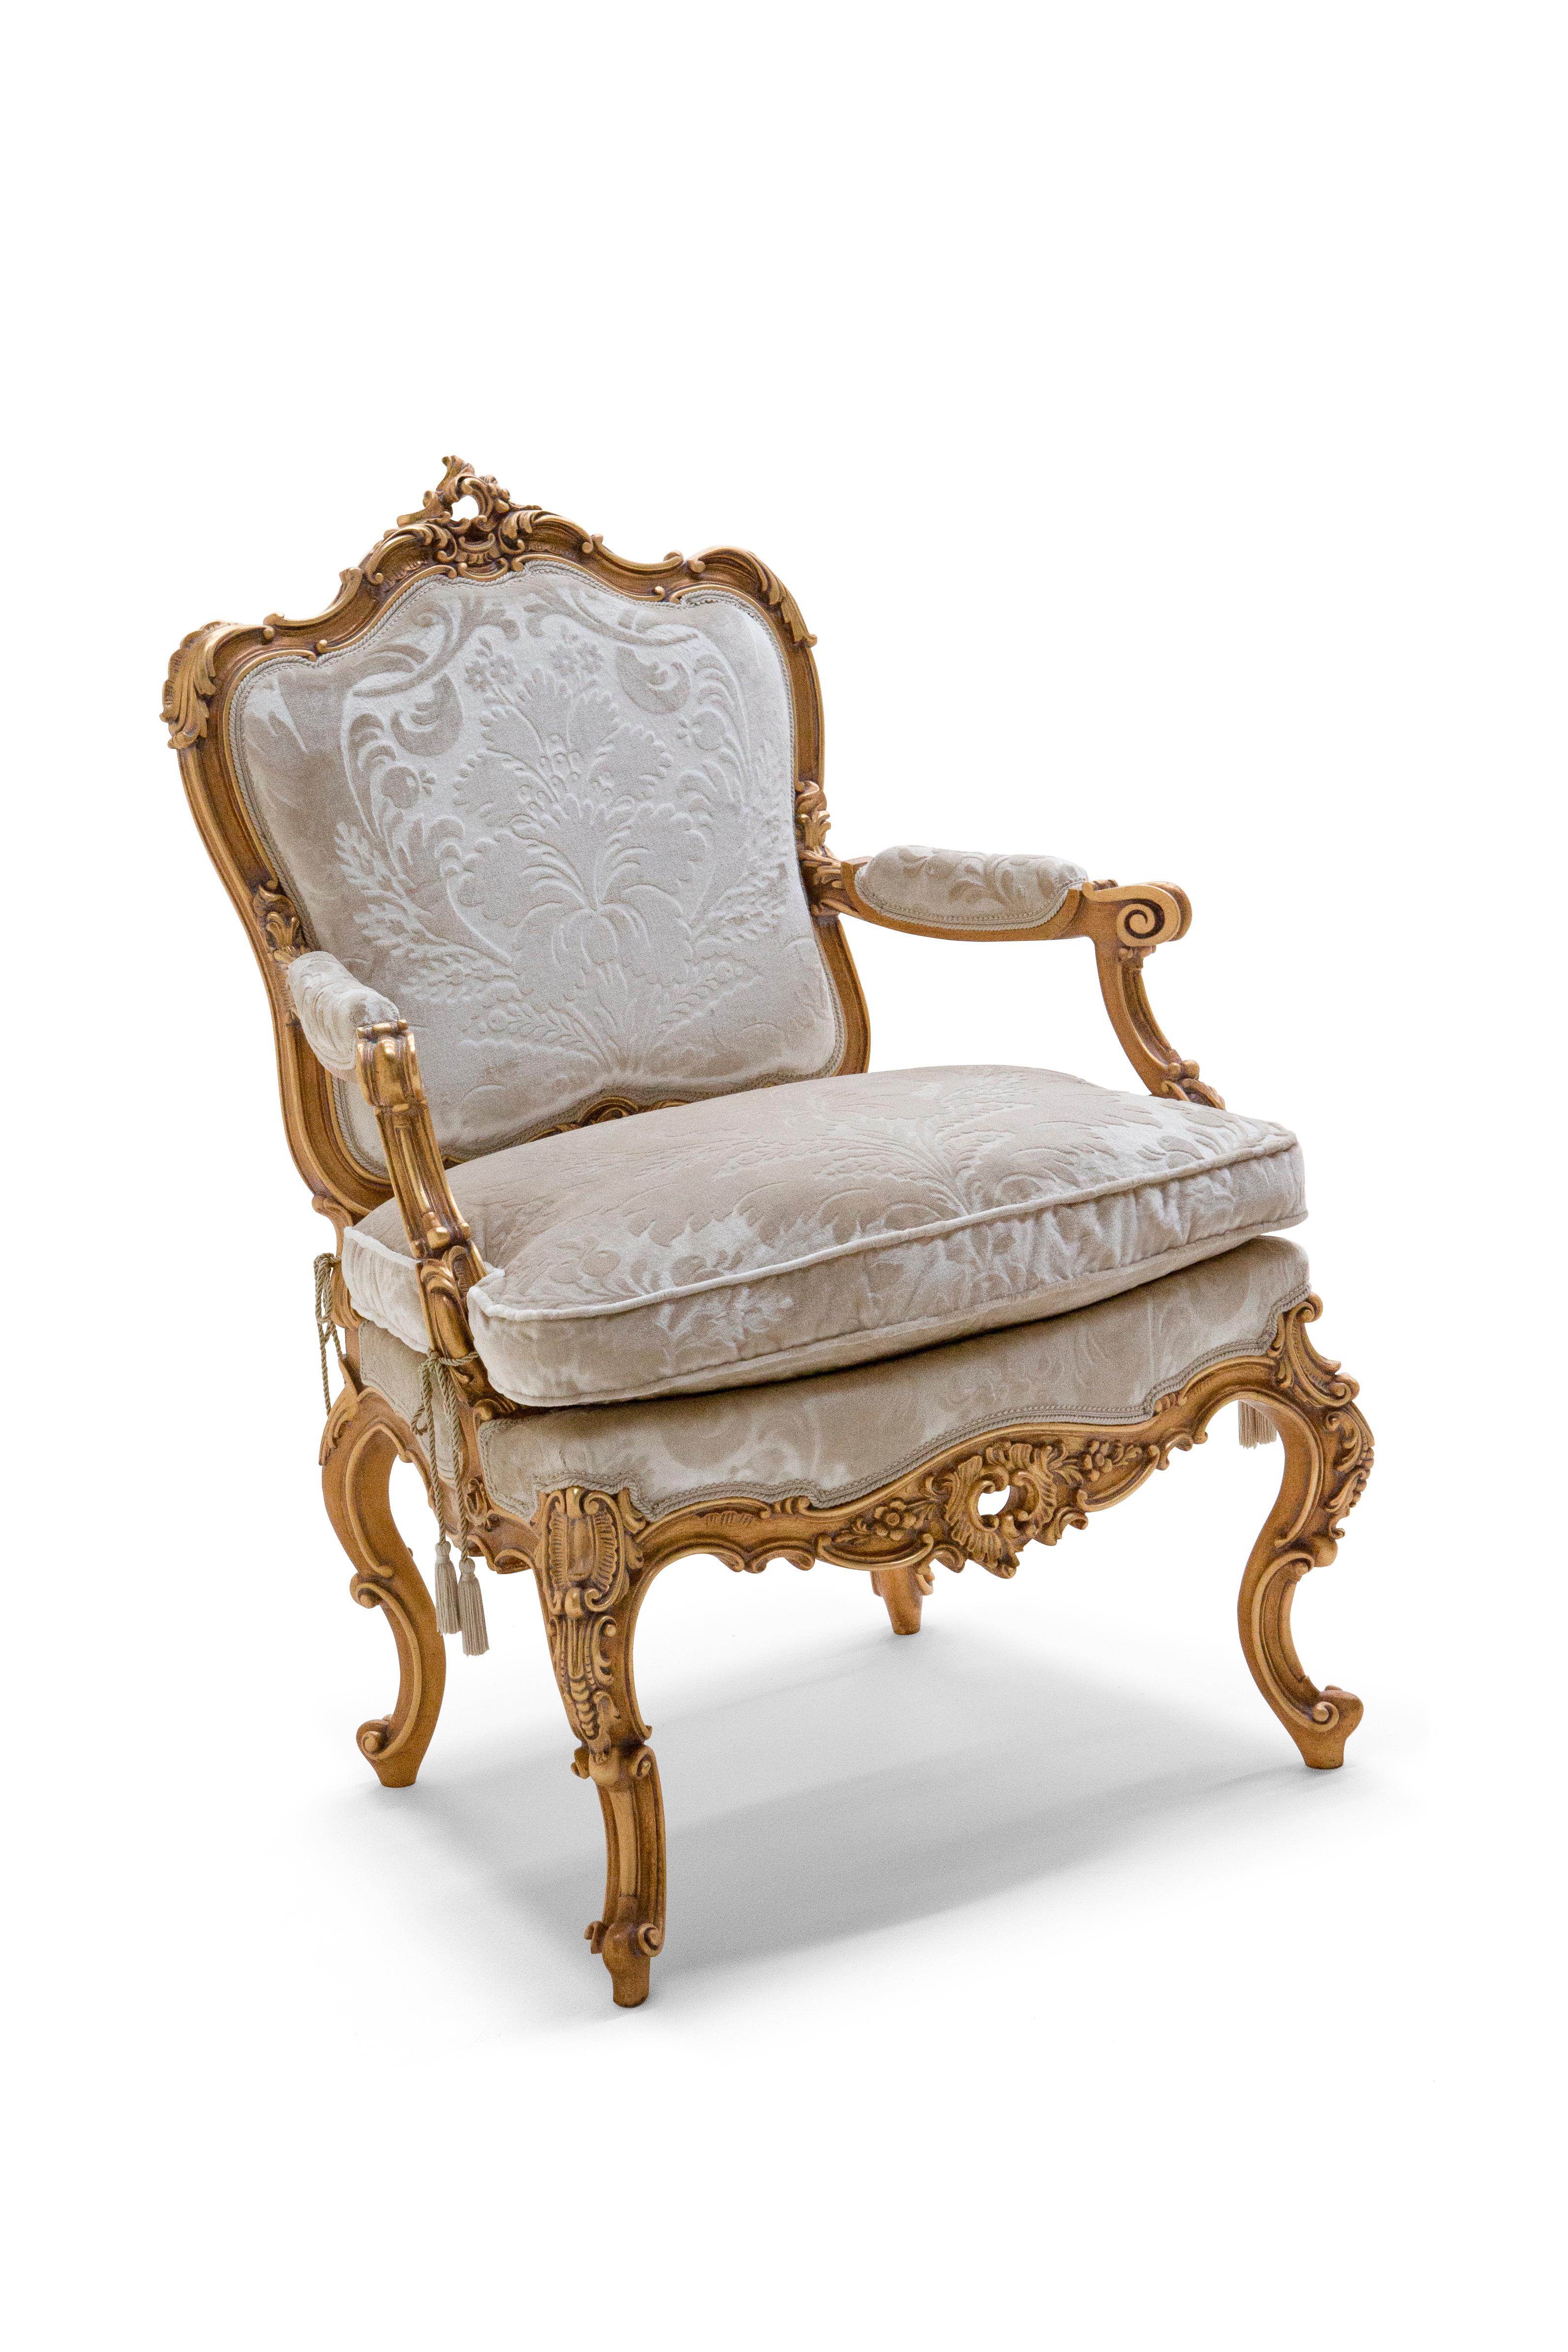 One of the most representative furniture of the Belloni 